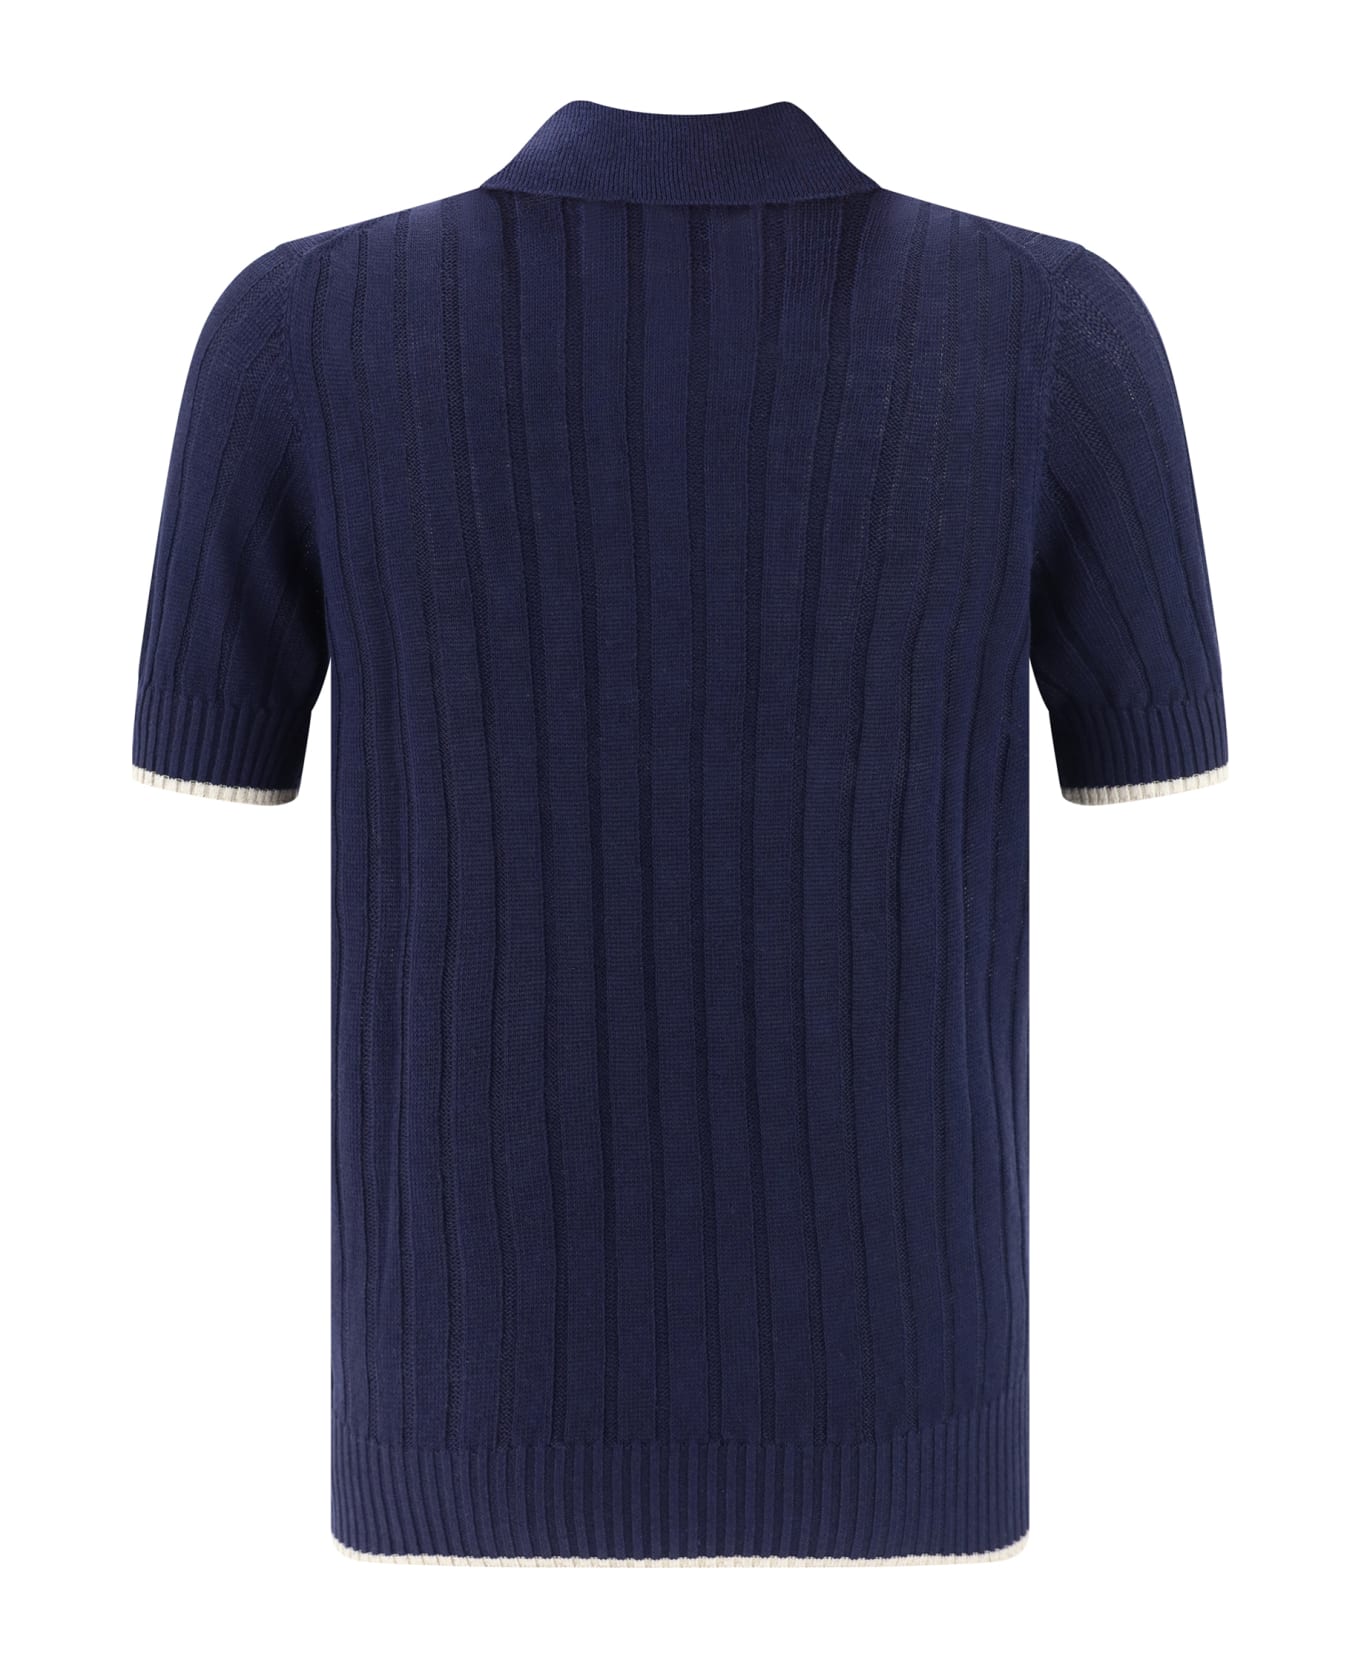 Brunello Cucinelli Polo Shirt - Navy+oyster